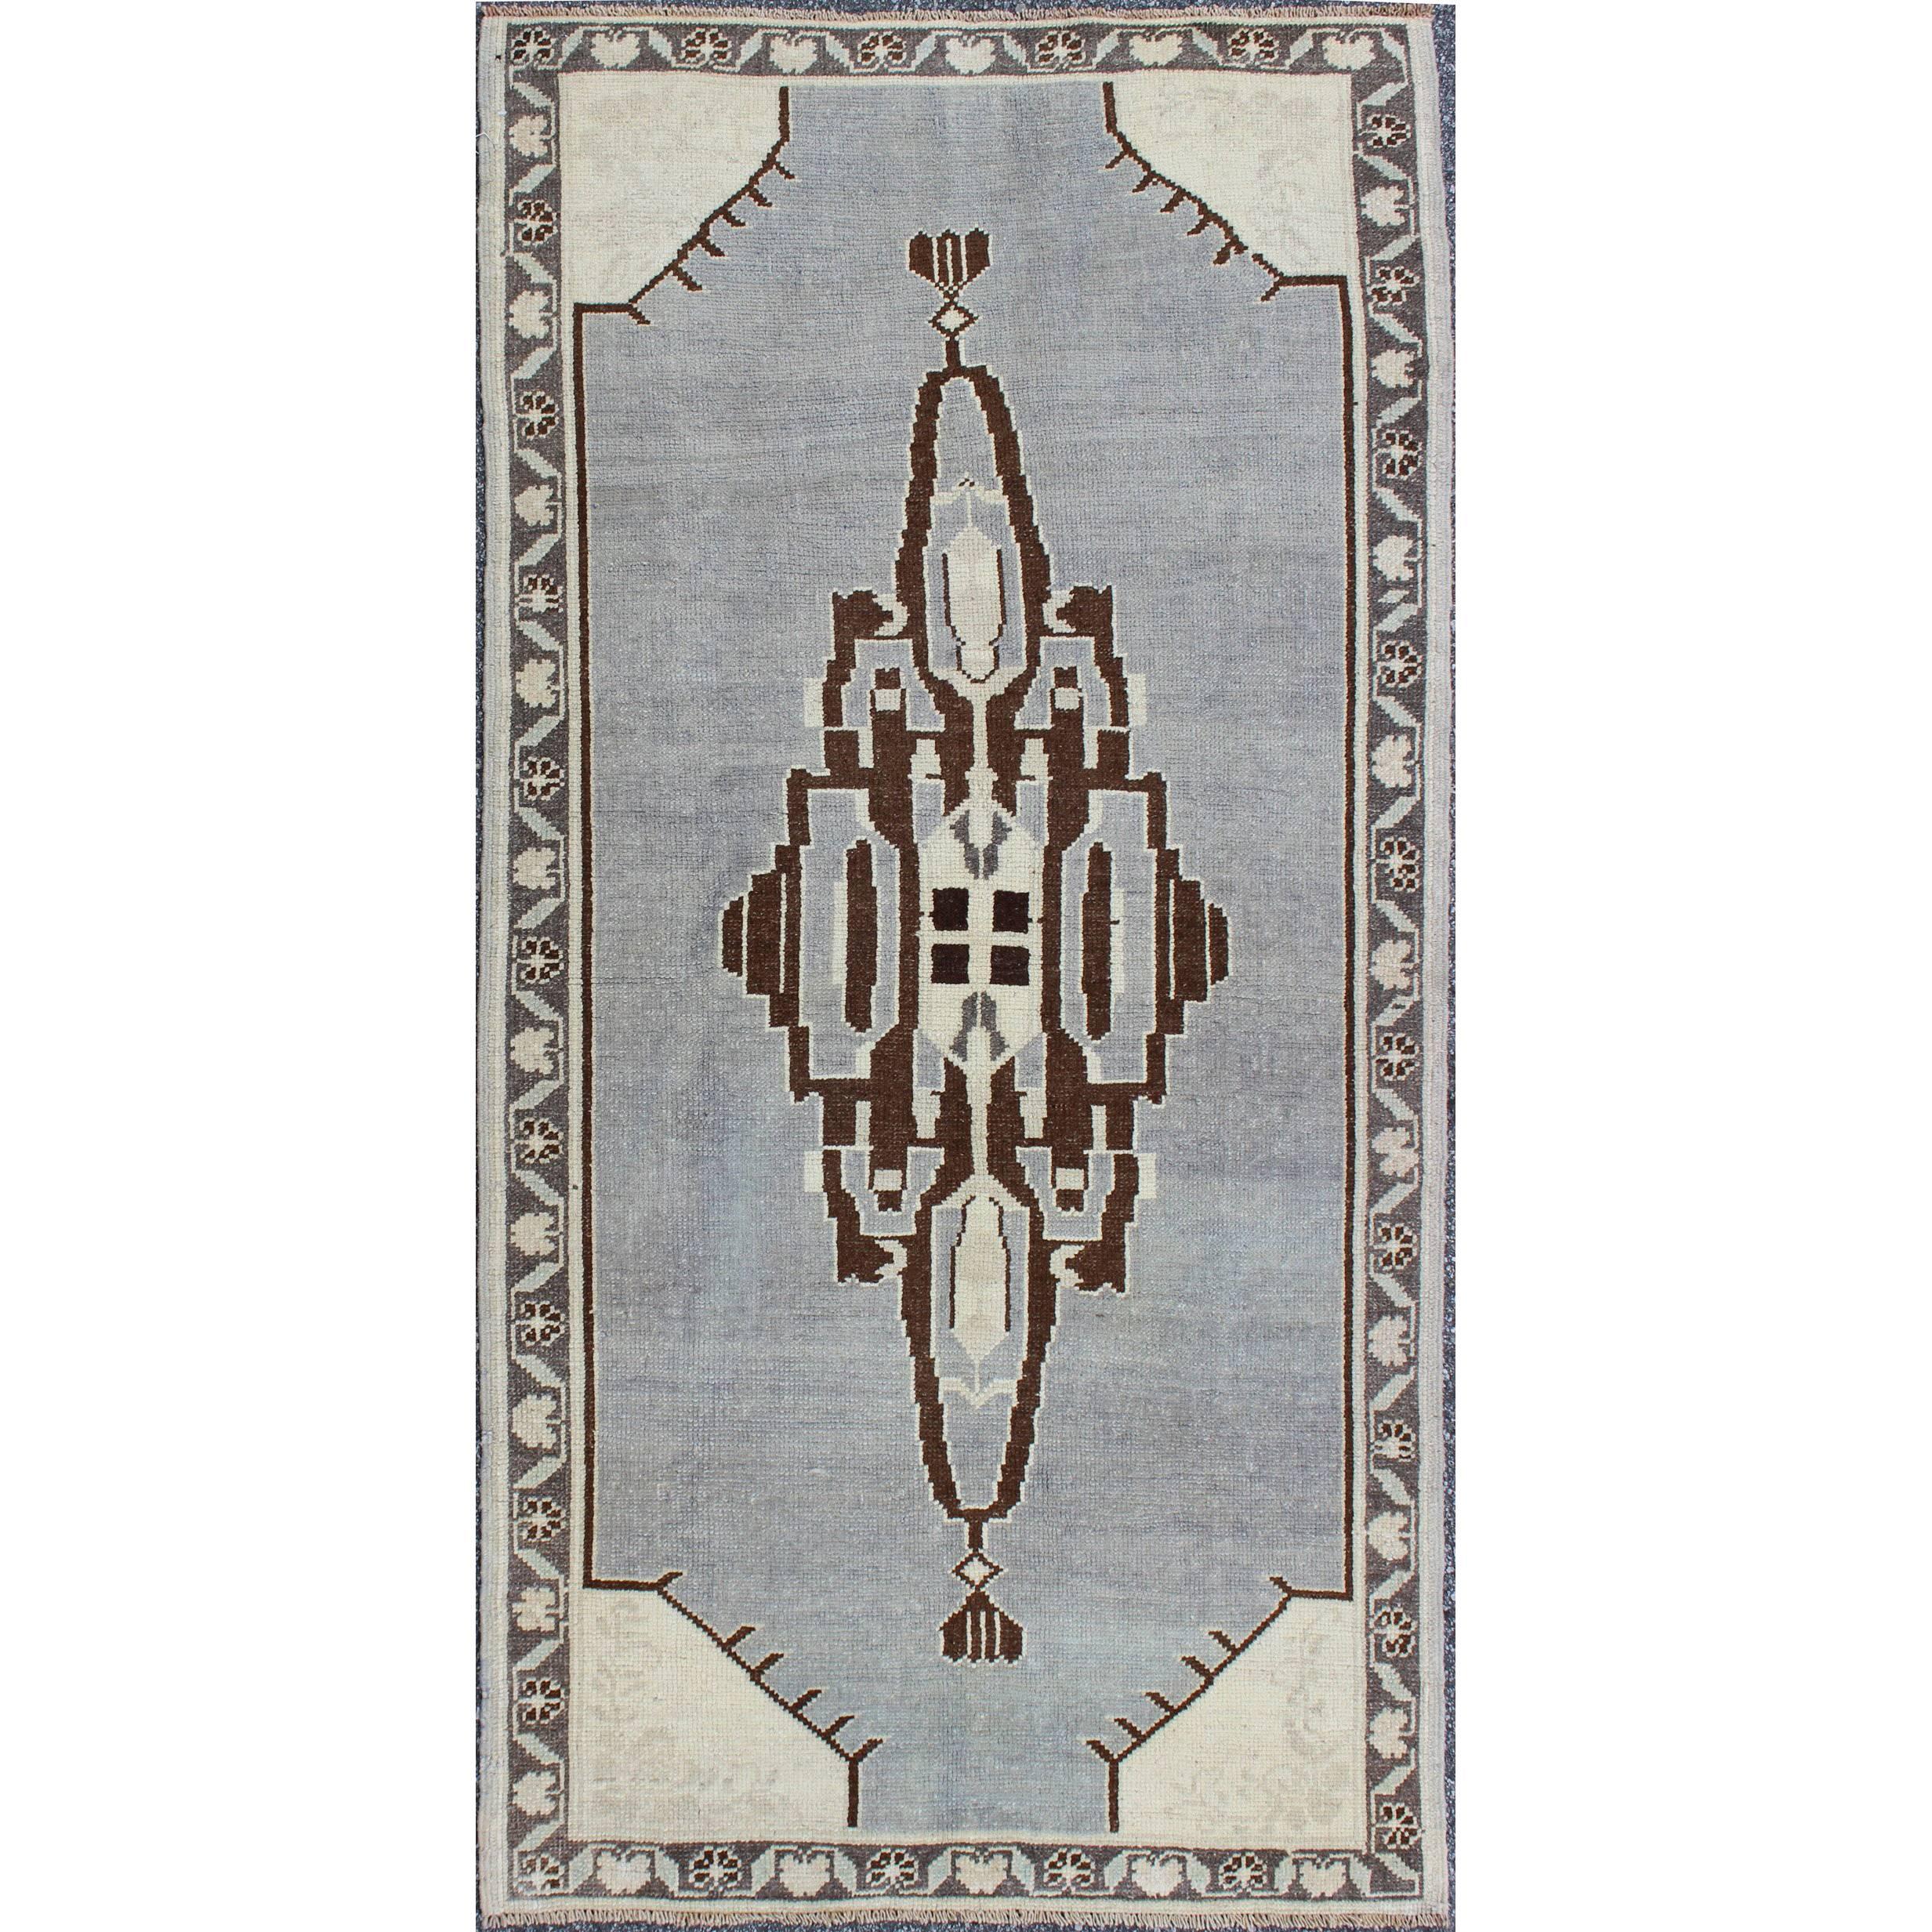 Vintage Turkish Oushak Rug with Central Medallion and Floral Borders in Ice Blue